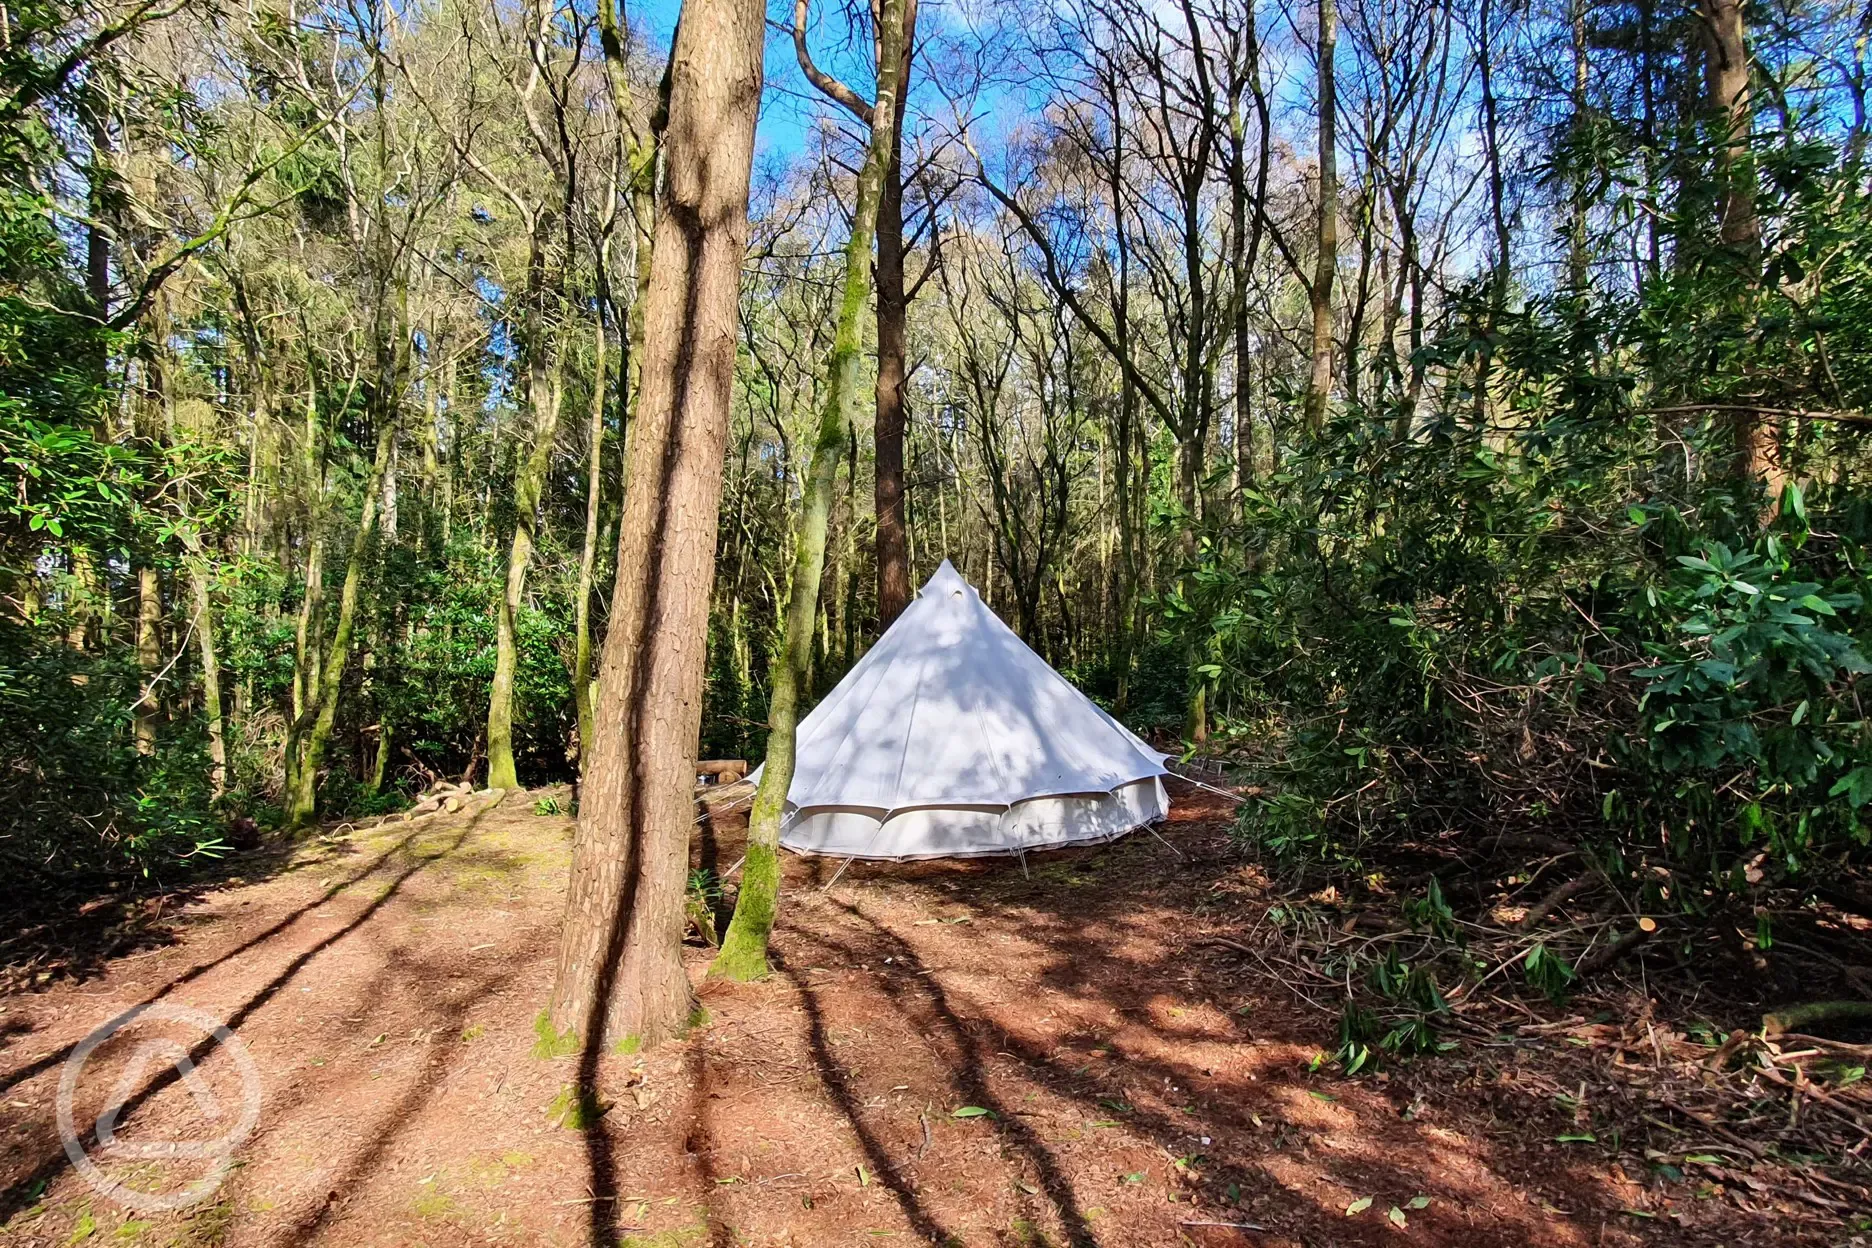 Wonderful wild camping in your own site